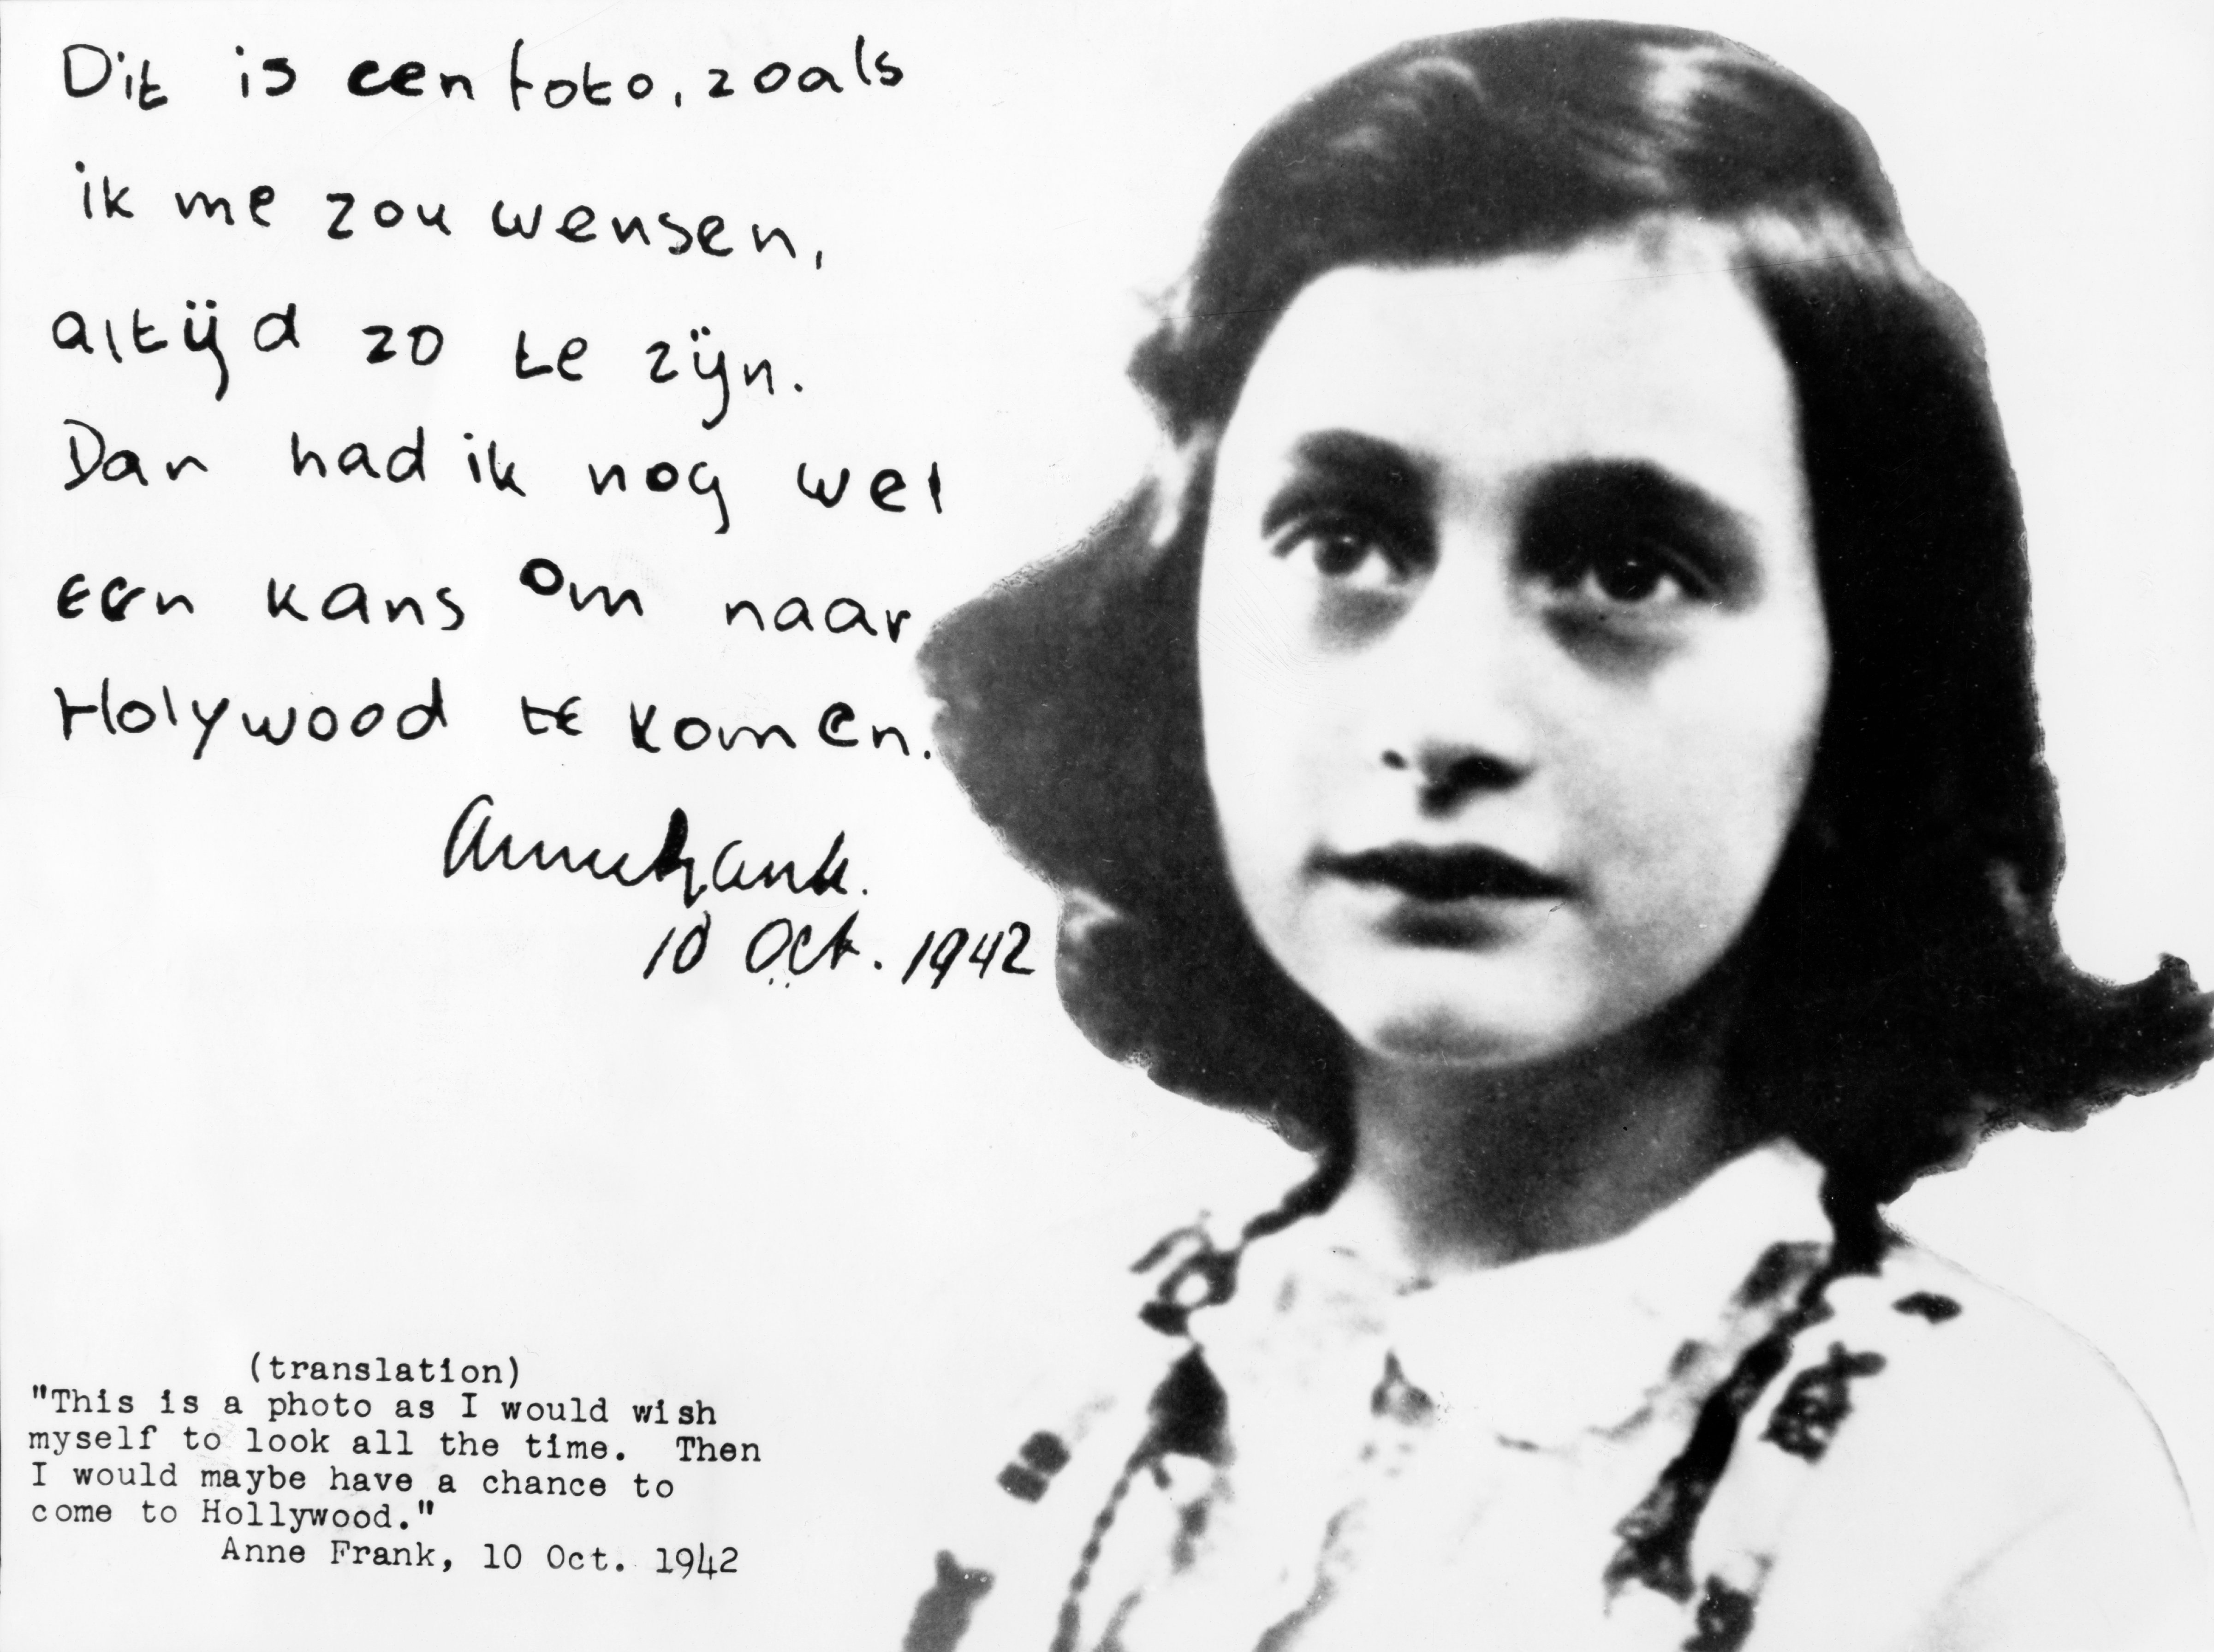 Anne Frank, a German Jew who emigrated with her family to the Netherlands during the Nazi period. Separated from the rest of her family, she and her sister died of typhoid fever in the concentration camp Bergen-Belsen. (ullstein bild—ullstein bild/Getty Images)